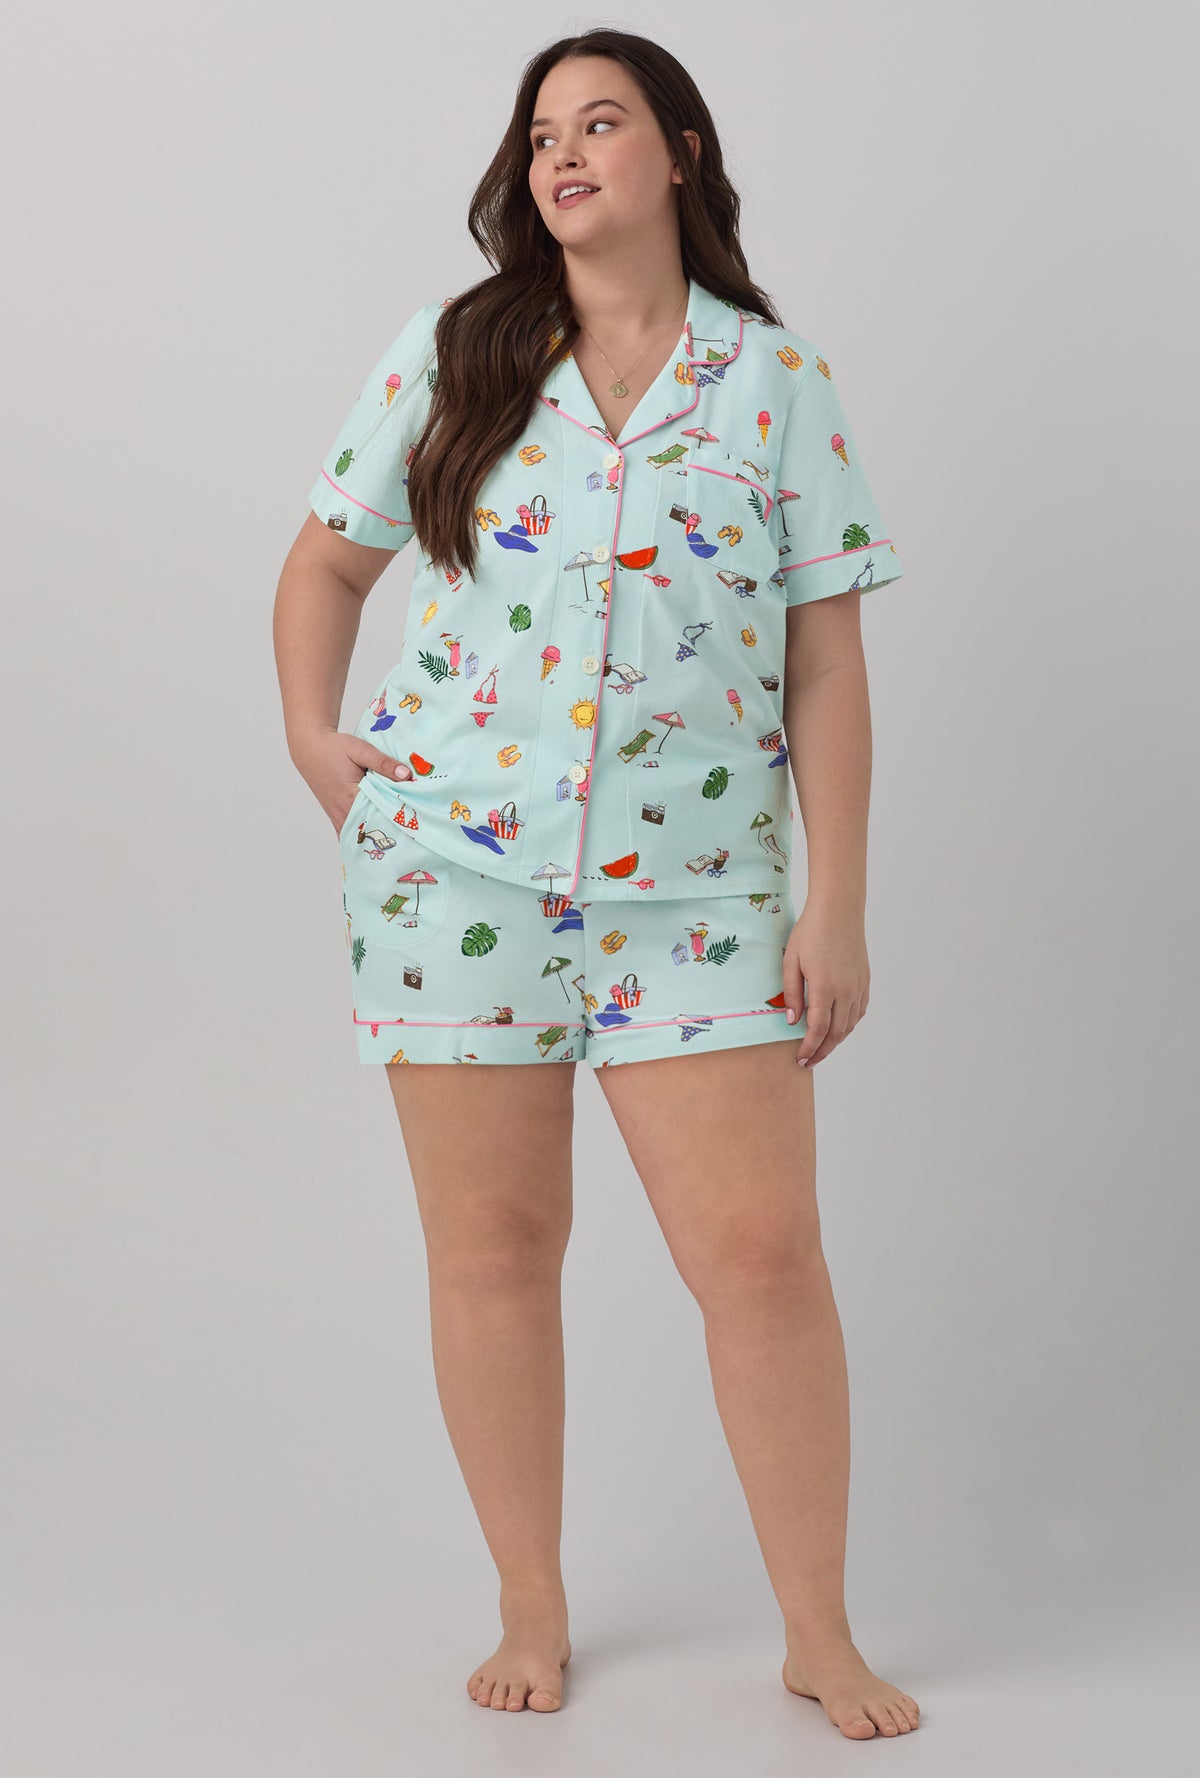 A lady wearing blue short sleeve classic shorty stretch jersey plus size pj set with beach day print